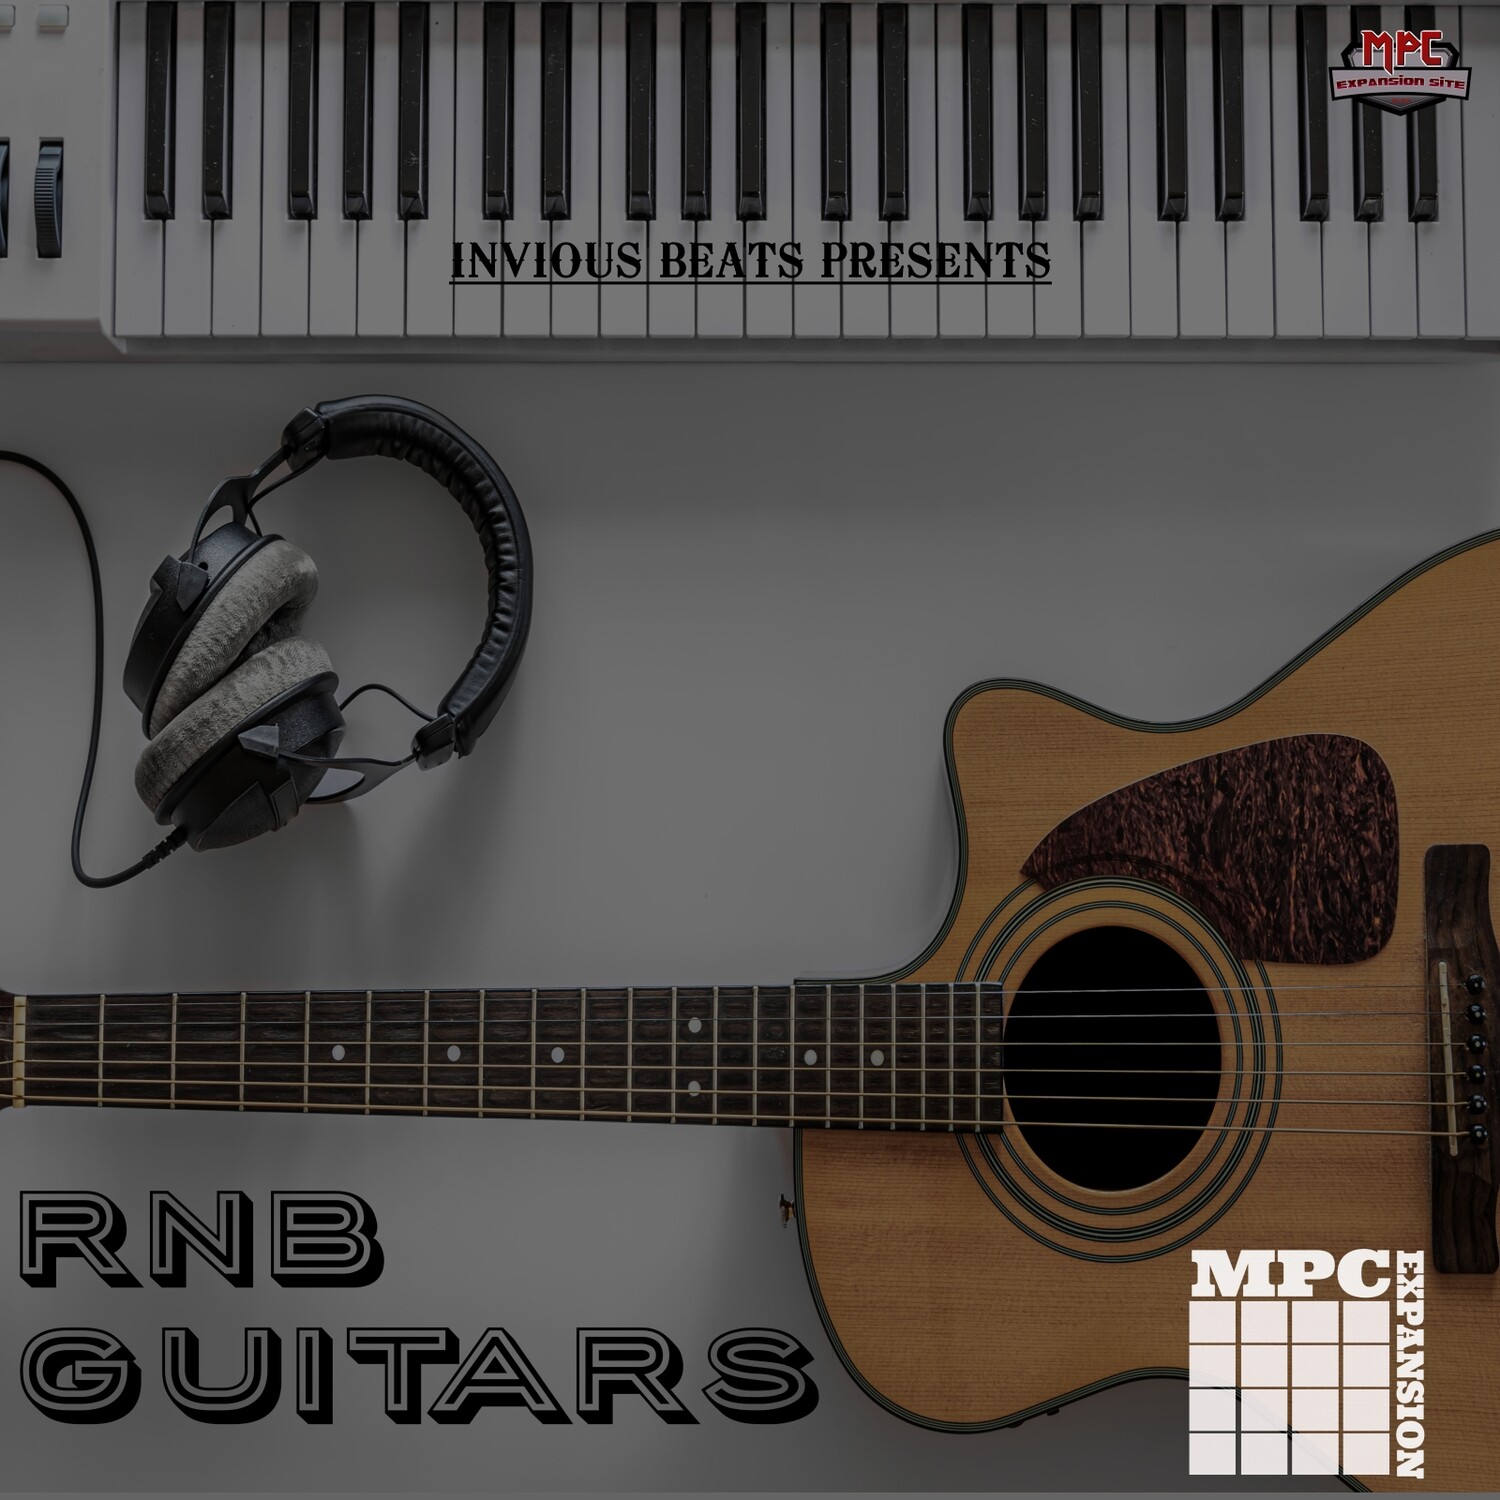 MPC EXPANSION 'RNB GUITARS' by INVIOUS